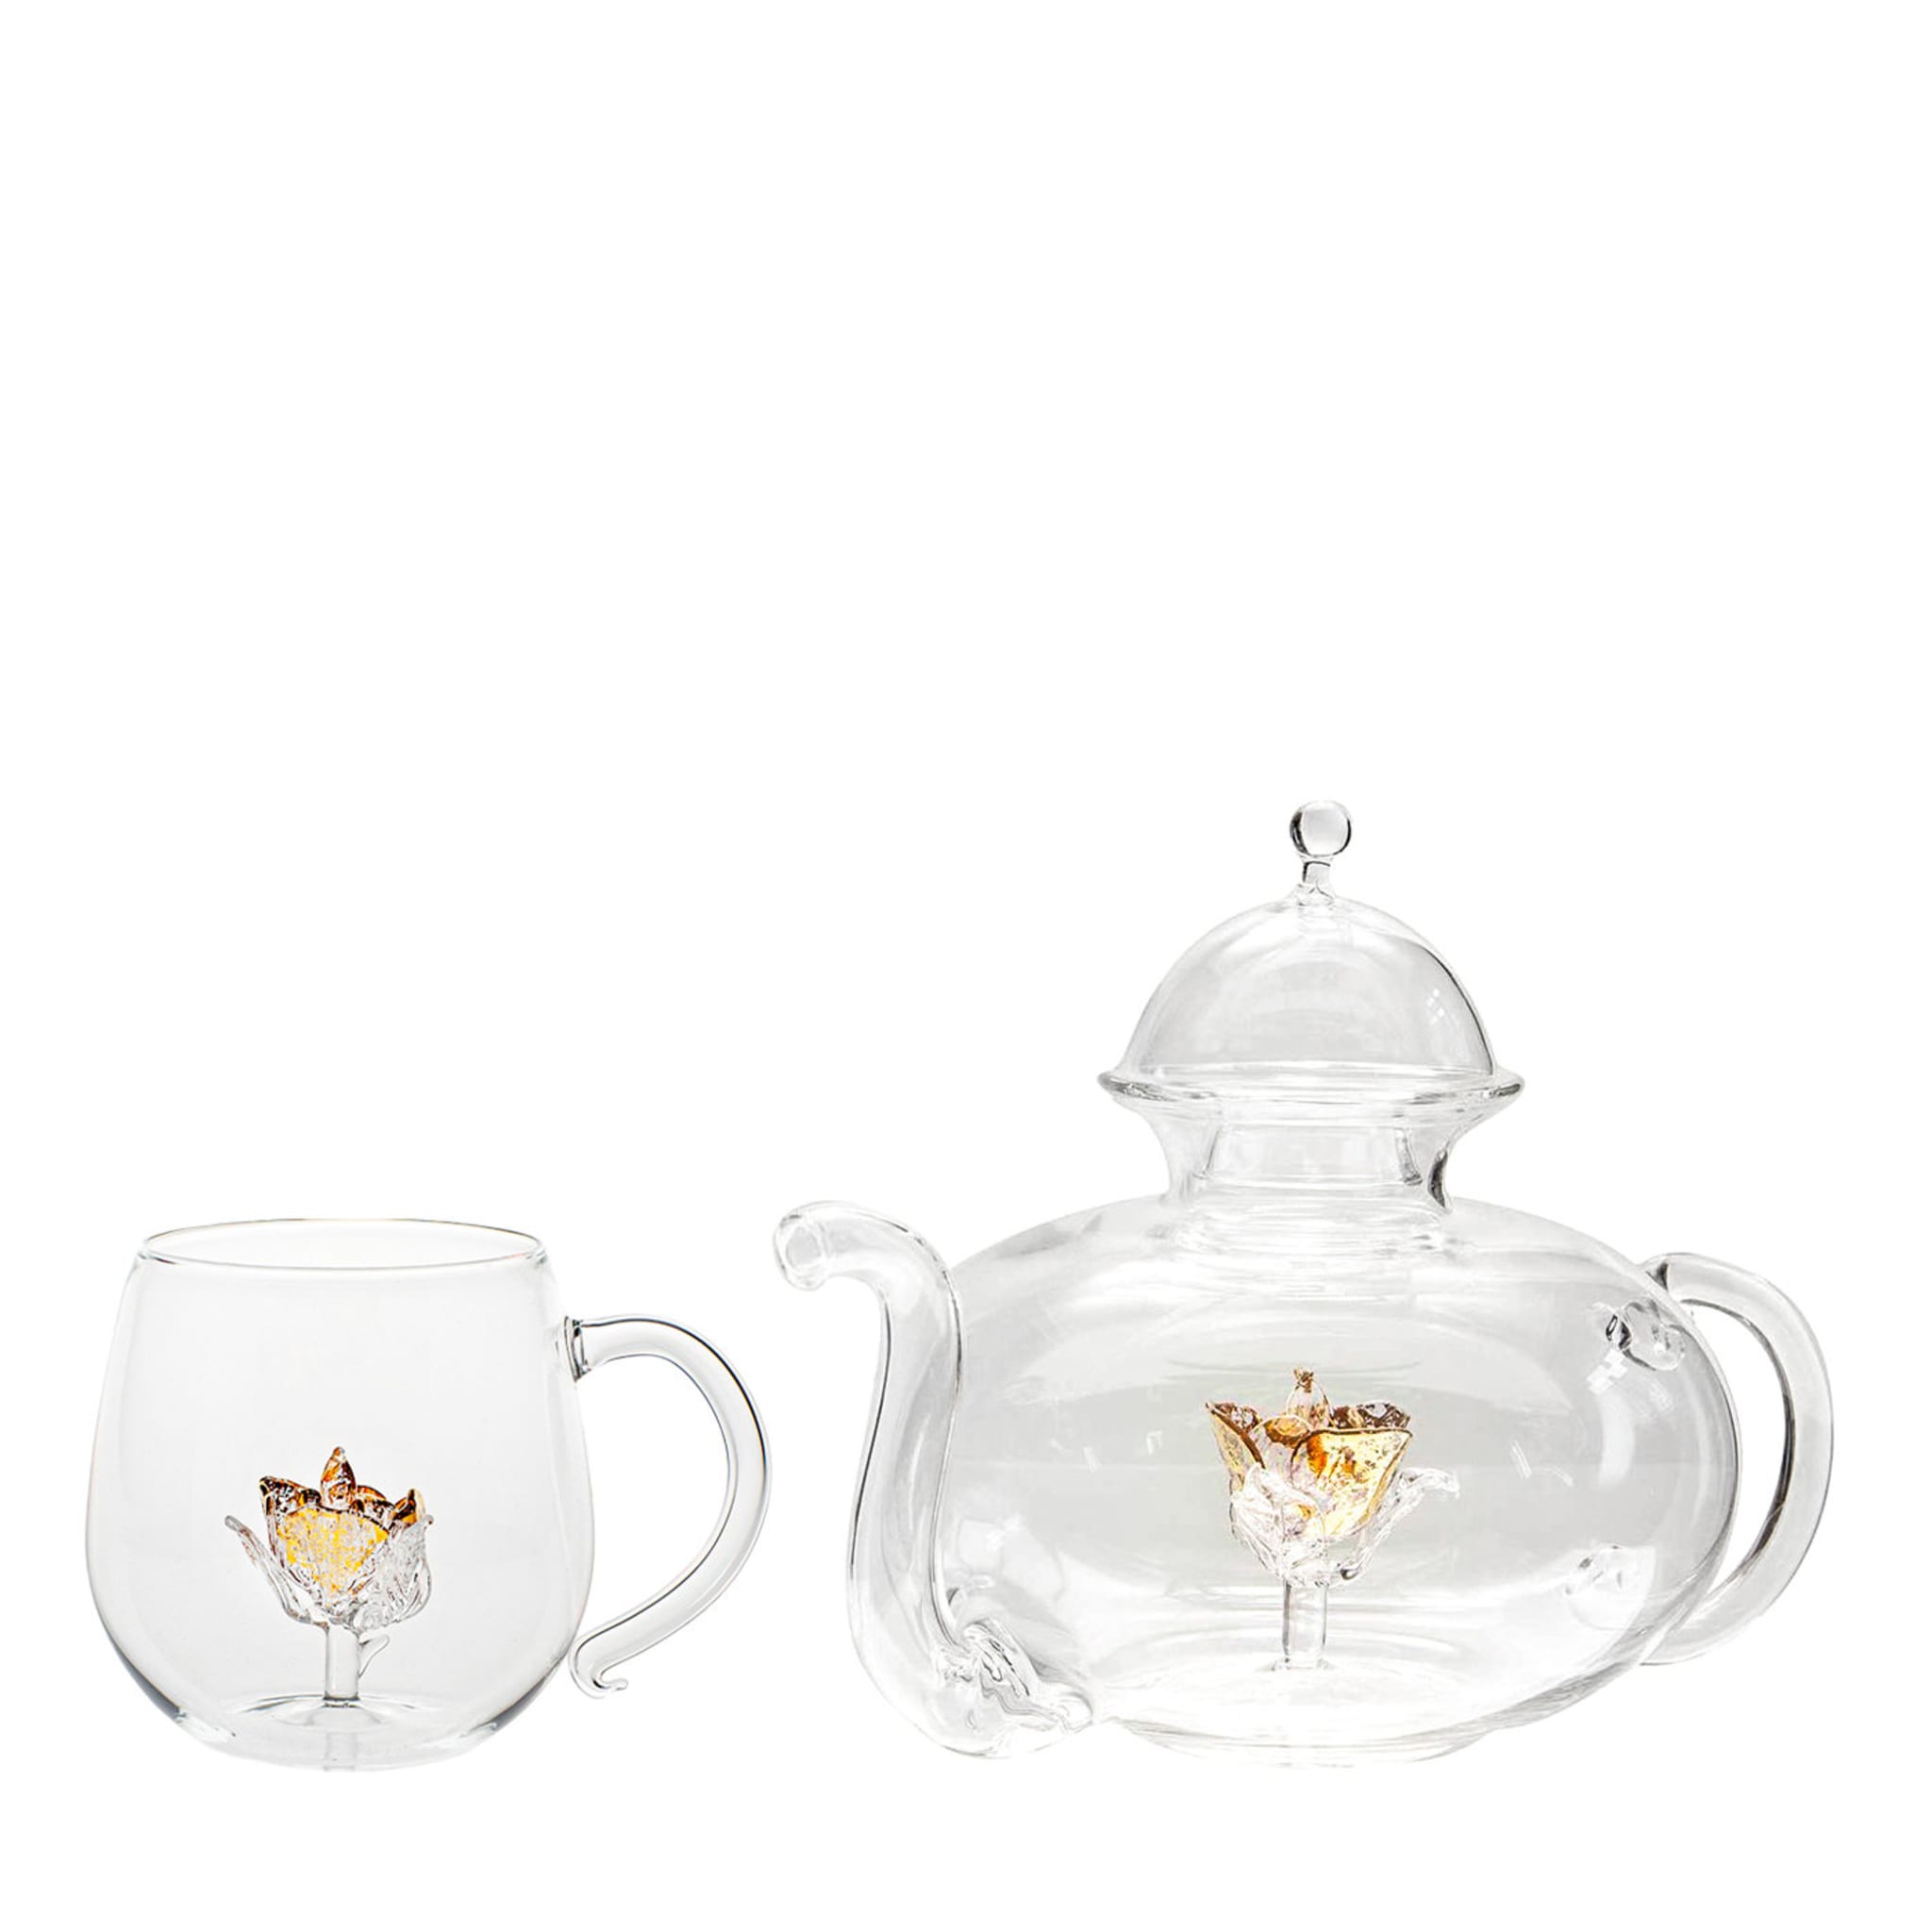 Mini Clear Glass Tea Cups Set of 2 - Small Glass Tea Cups with